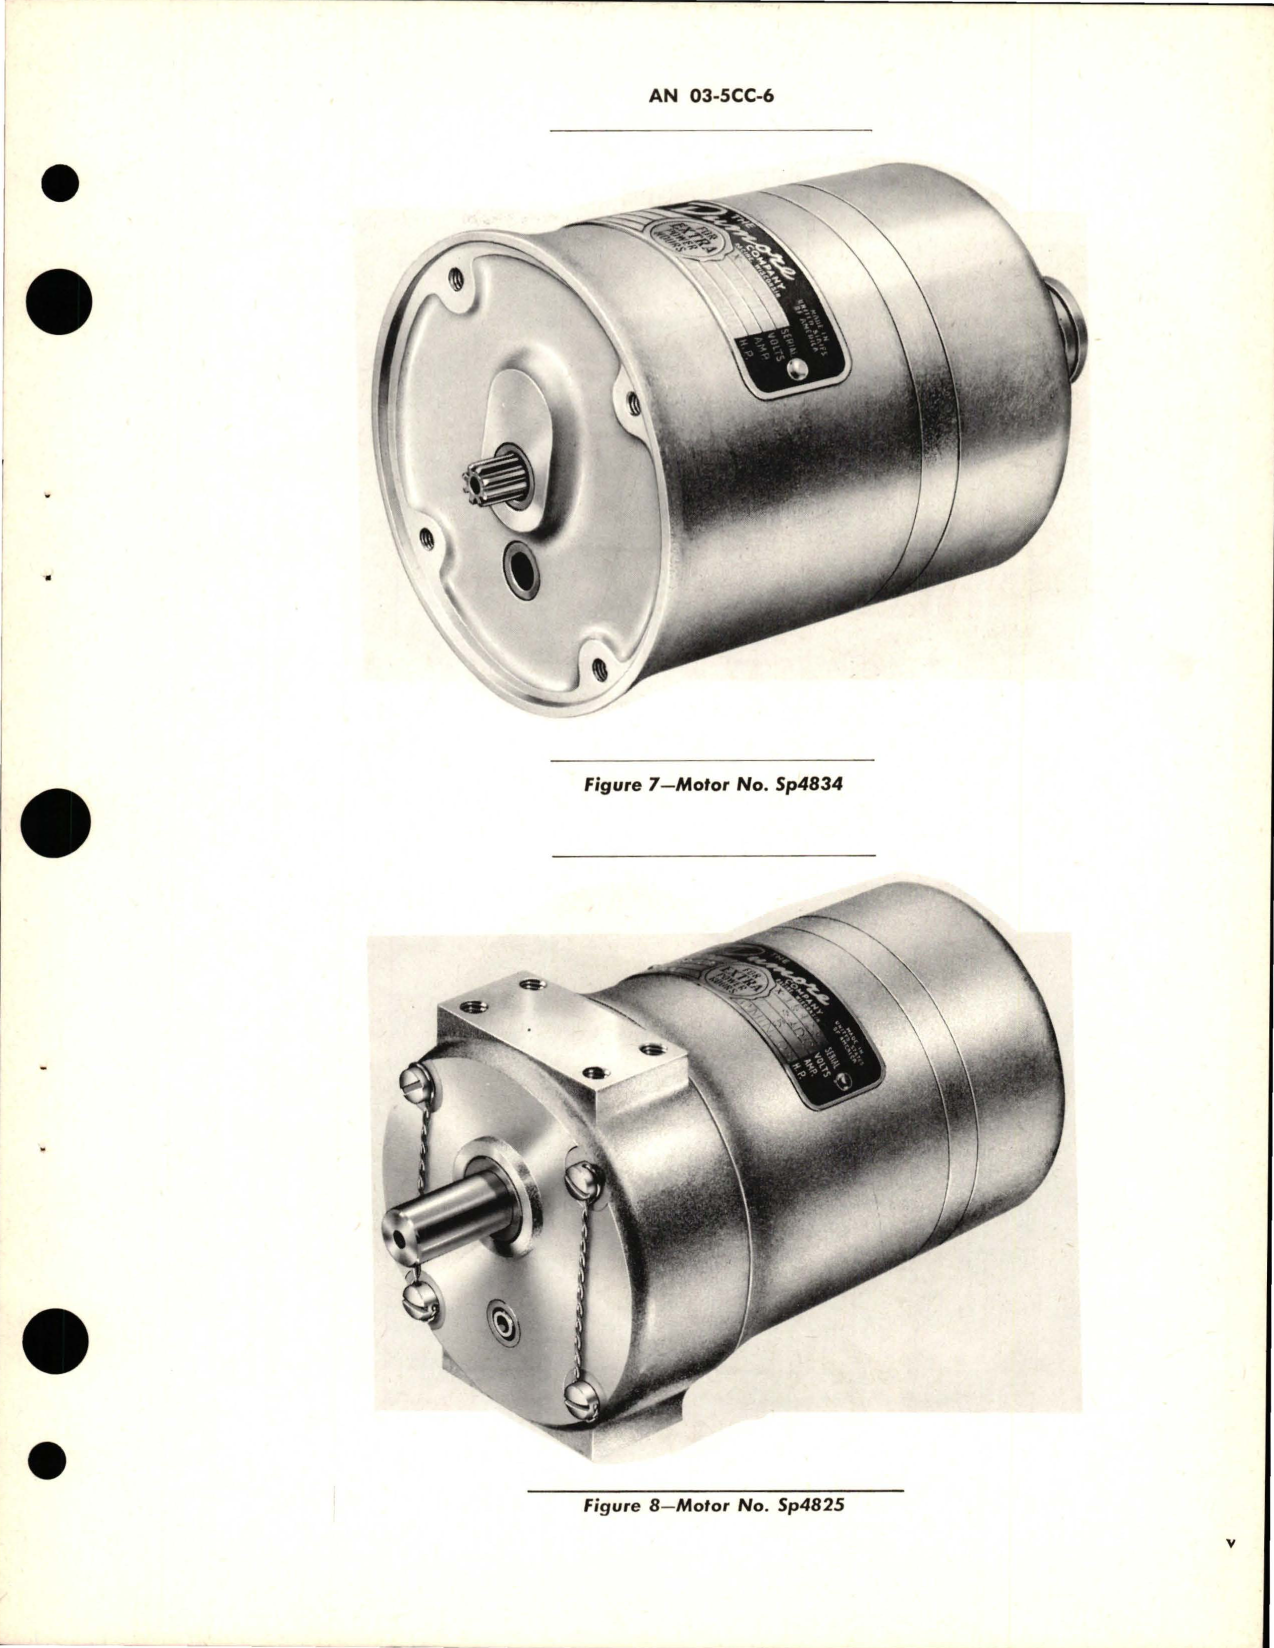 Sample page 7 from AirCorps Library document: Operation, Service, and Overhaul Instructions with Parts Catalog for Fractional Horsepower Electric Motors